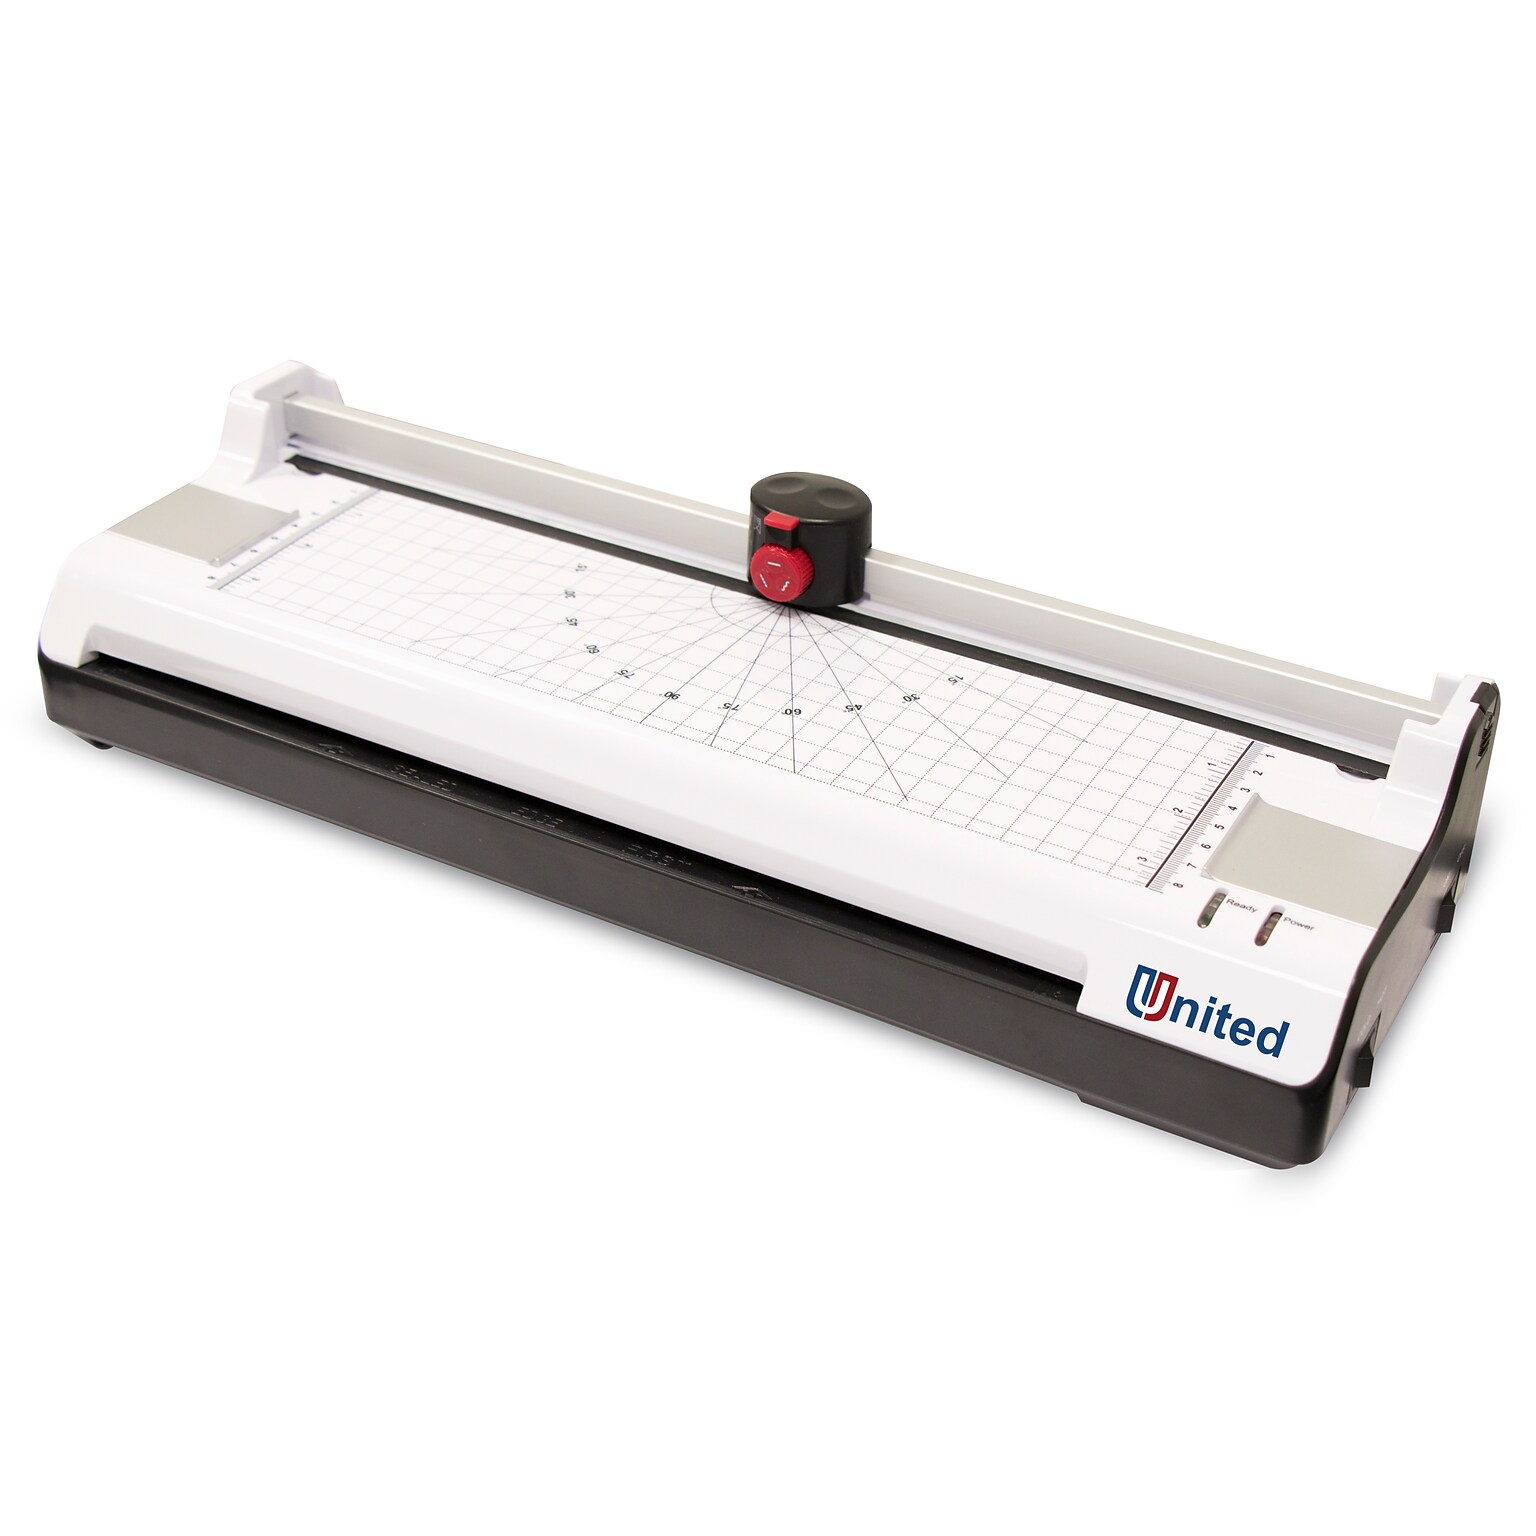 United LT13 Thermal & Cold Laminator with Paper Trimmer and Corner Rounder, 13 Width, Black/White (LT13)